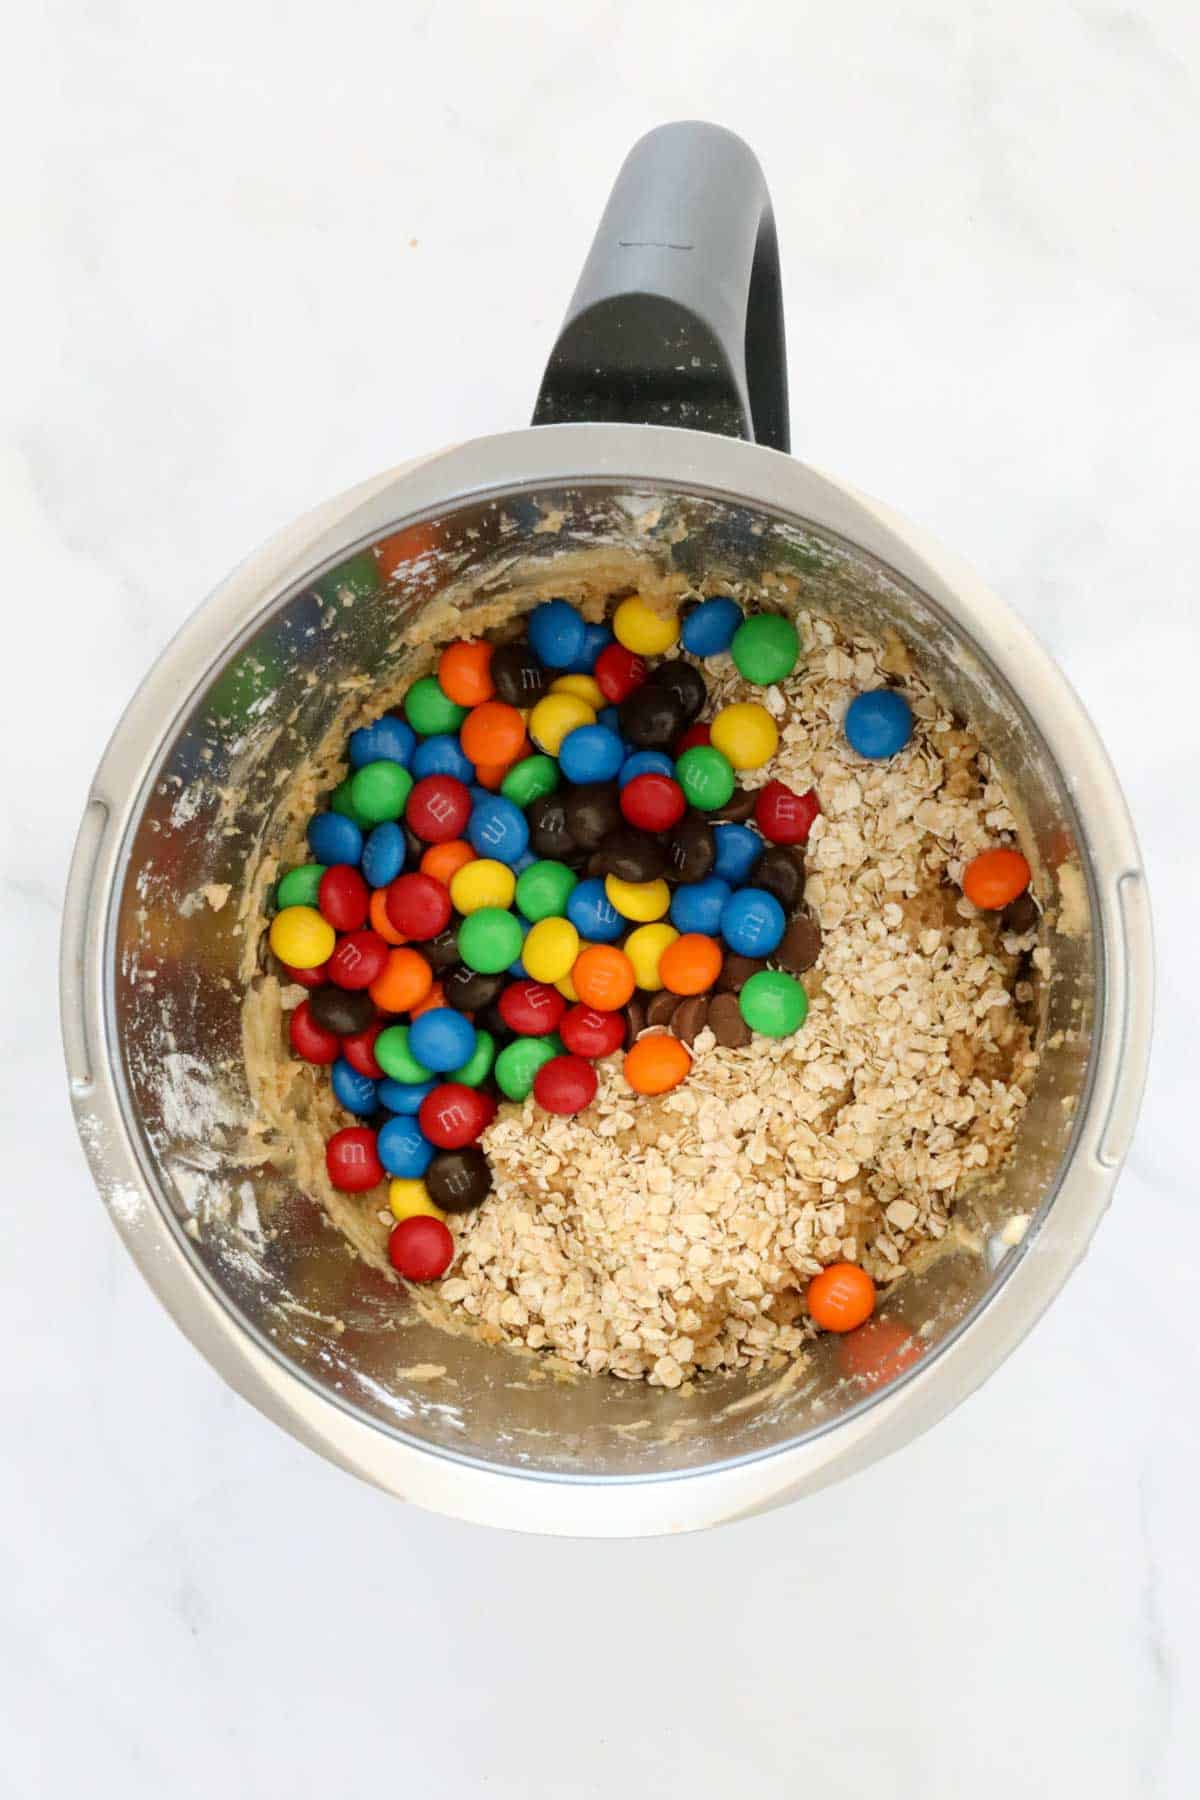 Oats and M&Ms in a Thermomix.